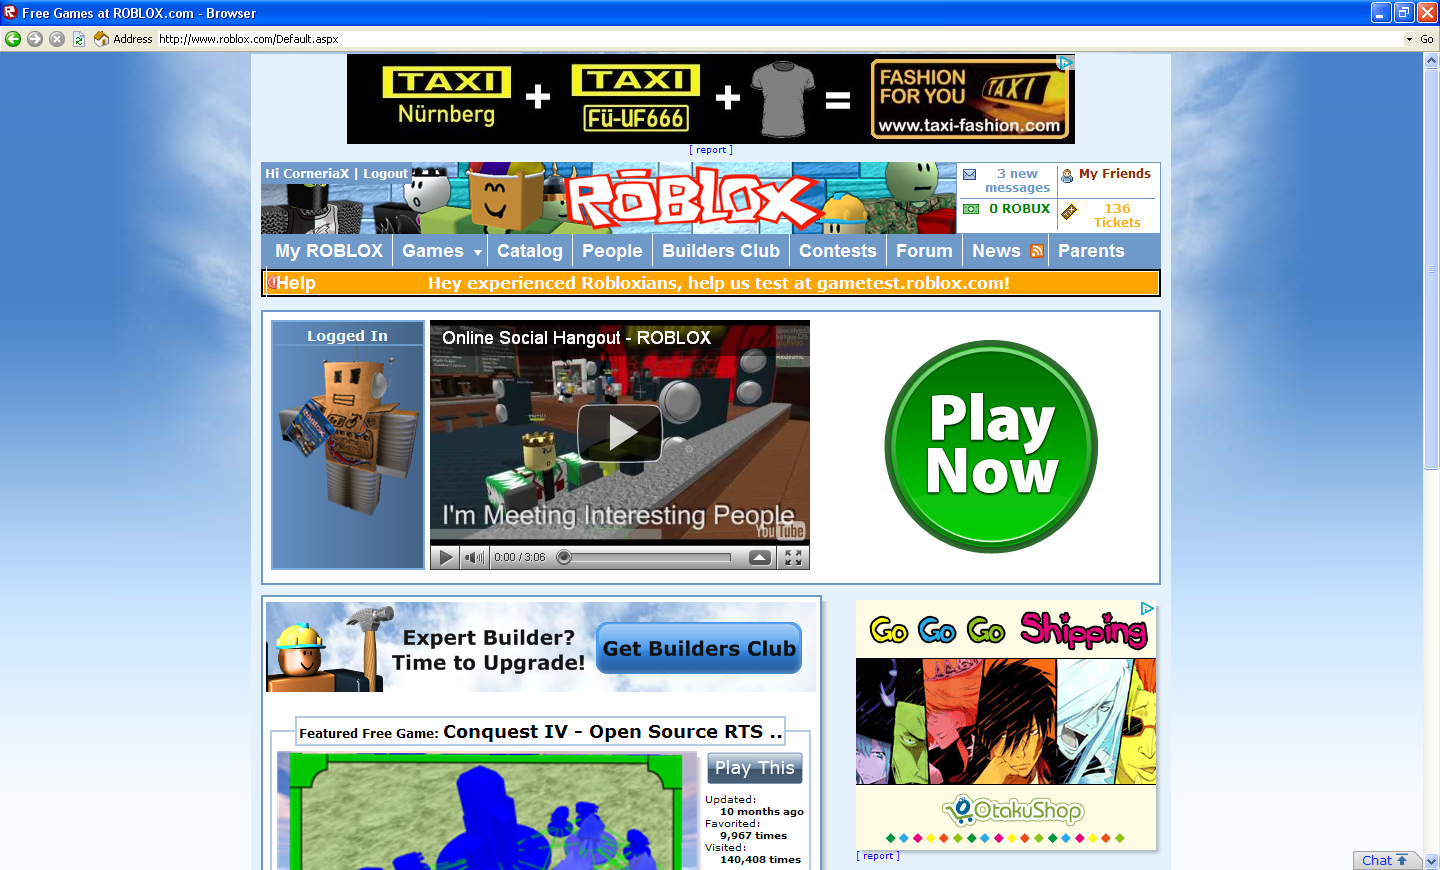 How to play Roblox in your Browser 